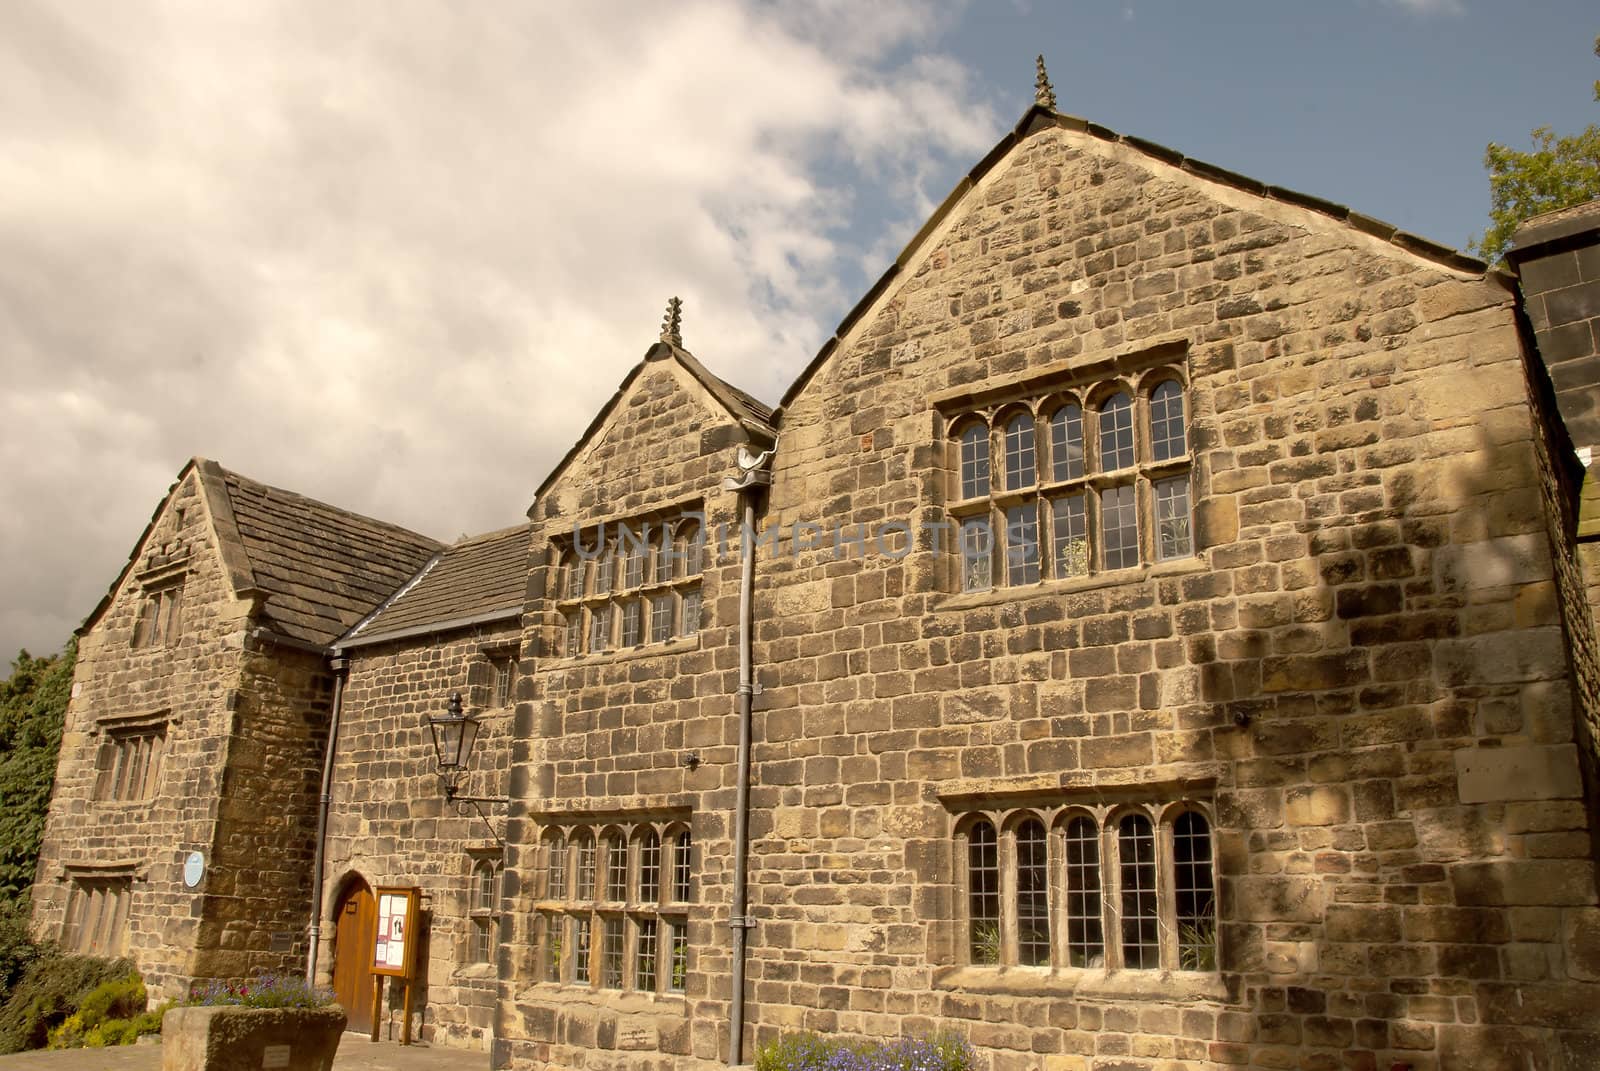 A Fifteenth Century Stone Built Manor House in Yorkshire